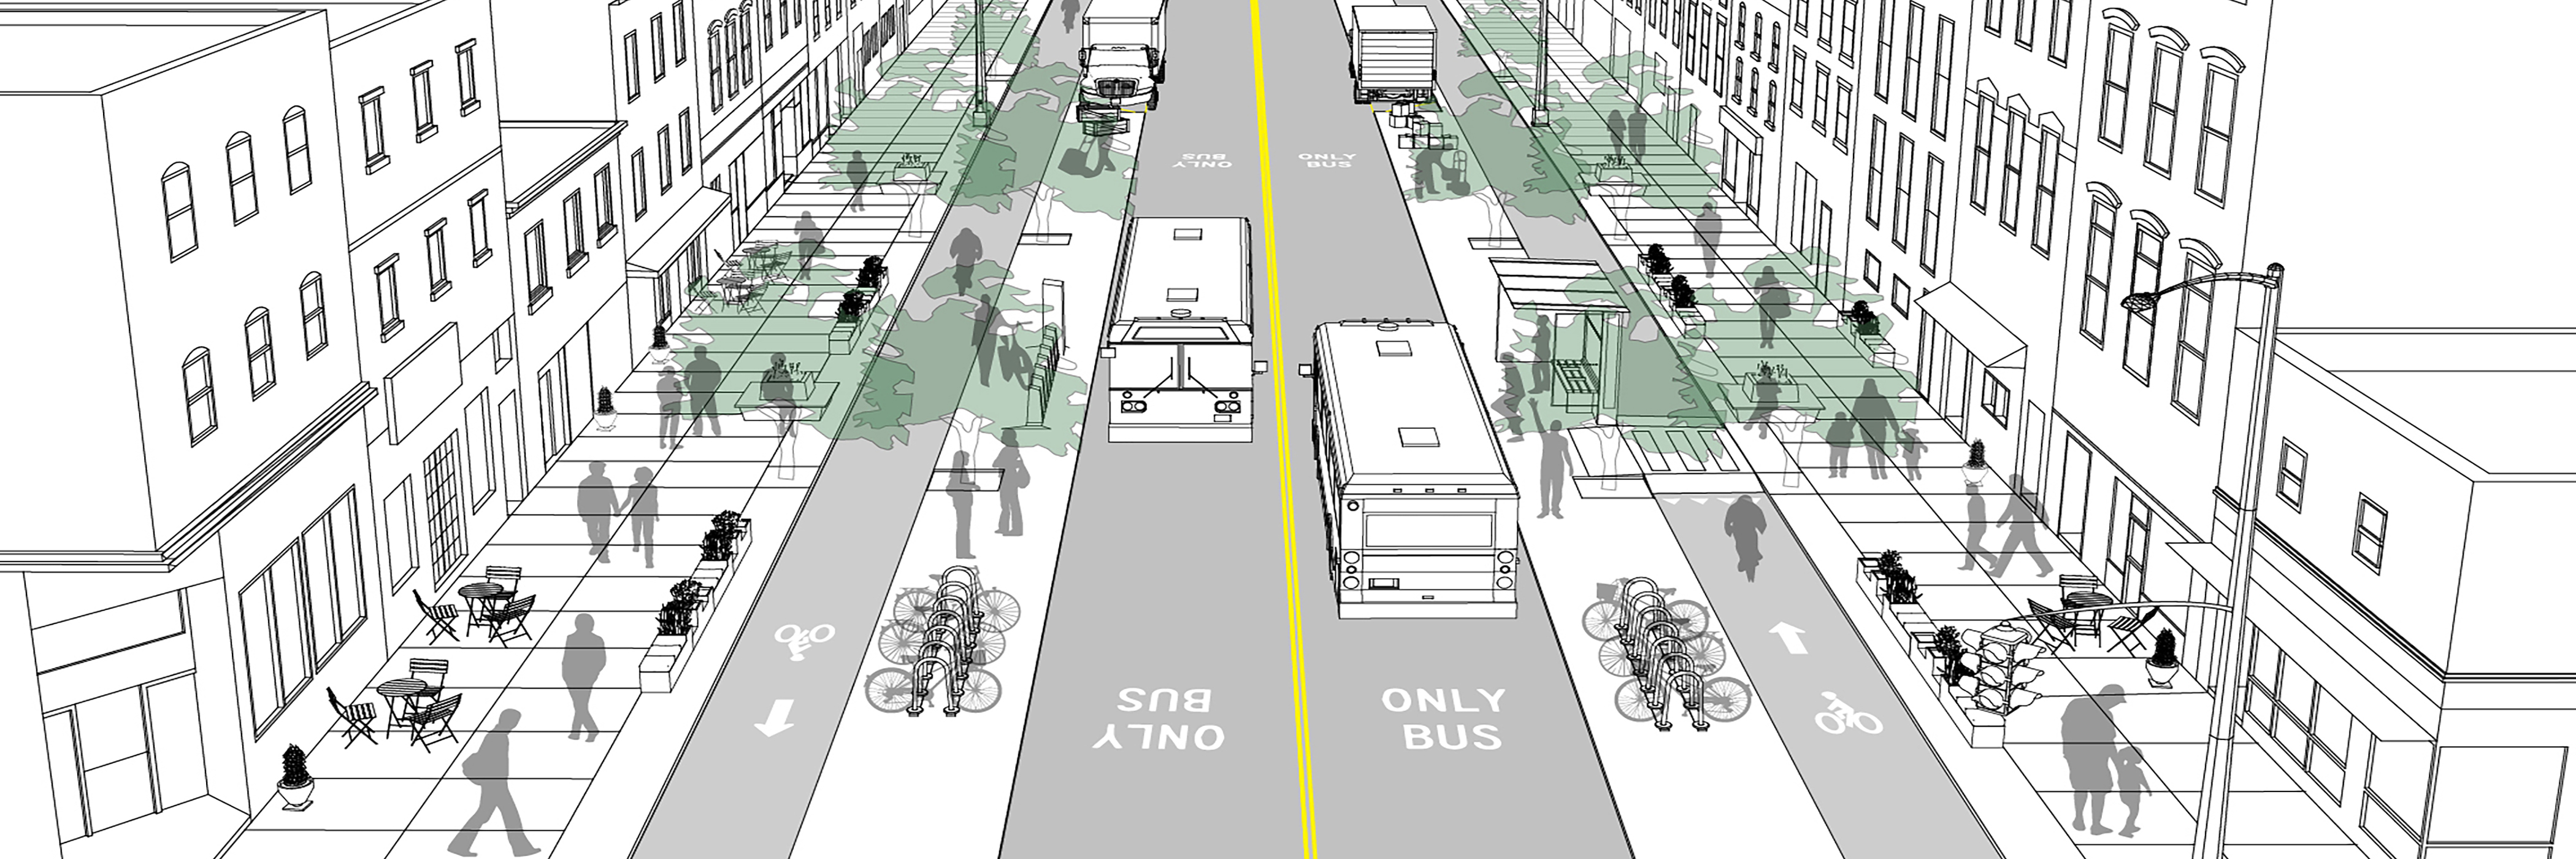 Street Plans Collaborative | Better Streets, Better Places